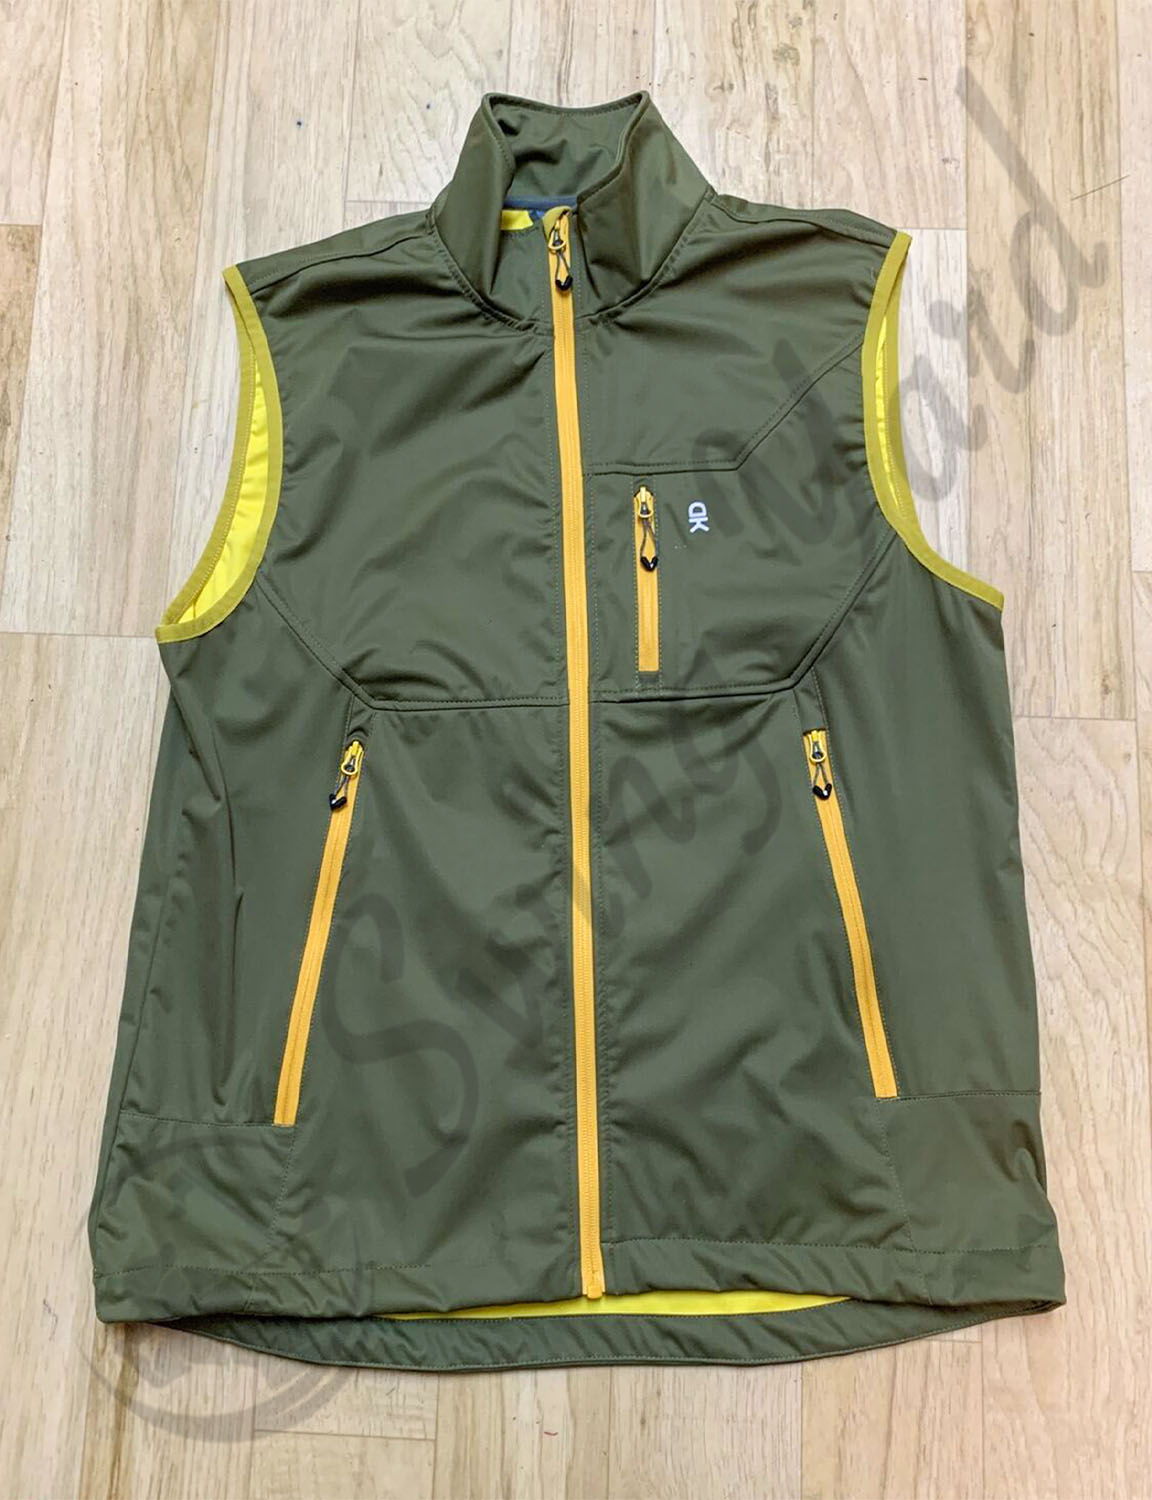 A Olive green Little donkey andy men lightweight softshell vests in the floor